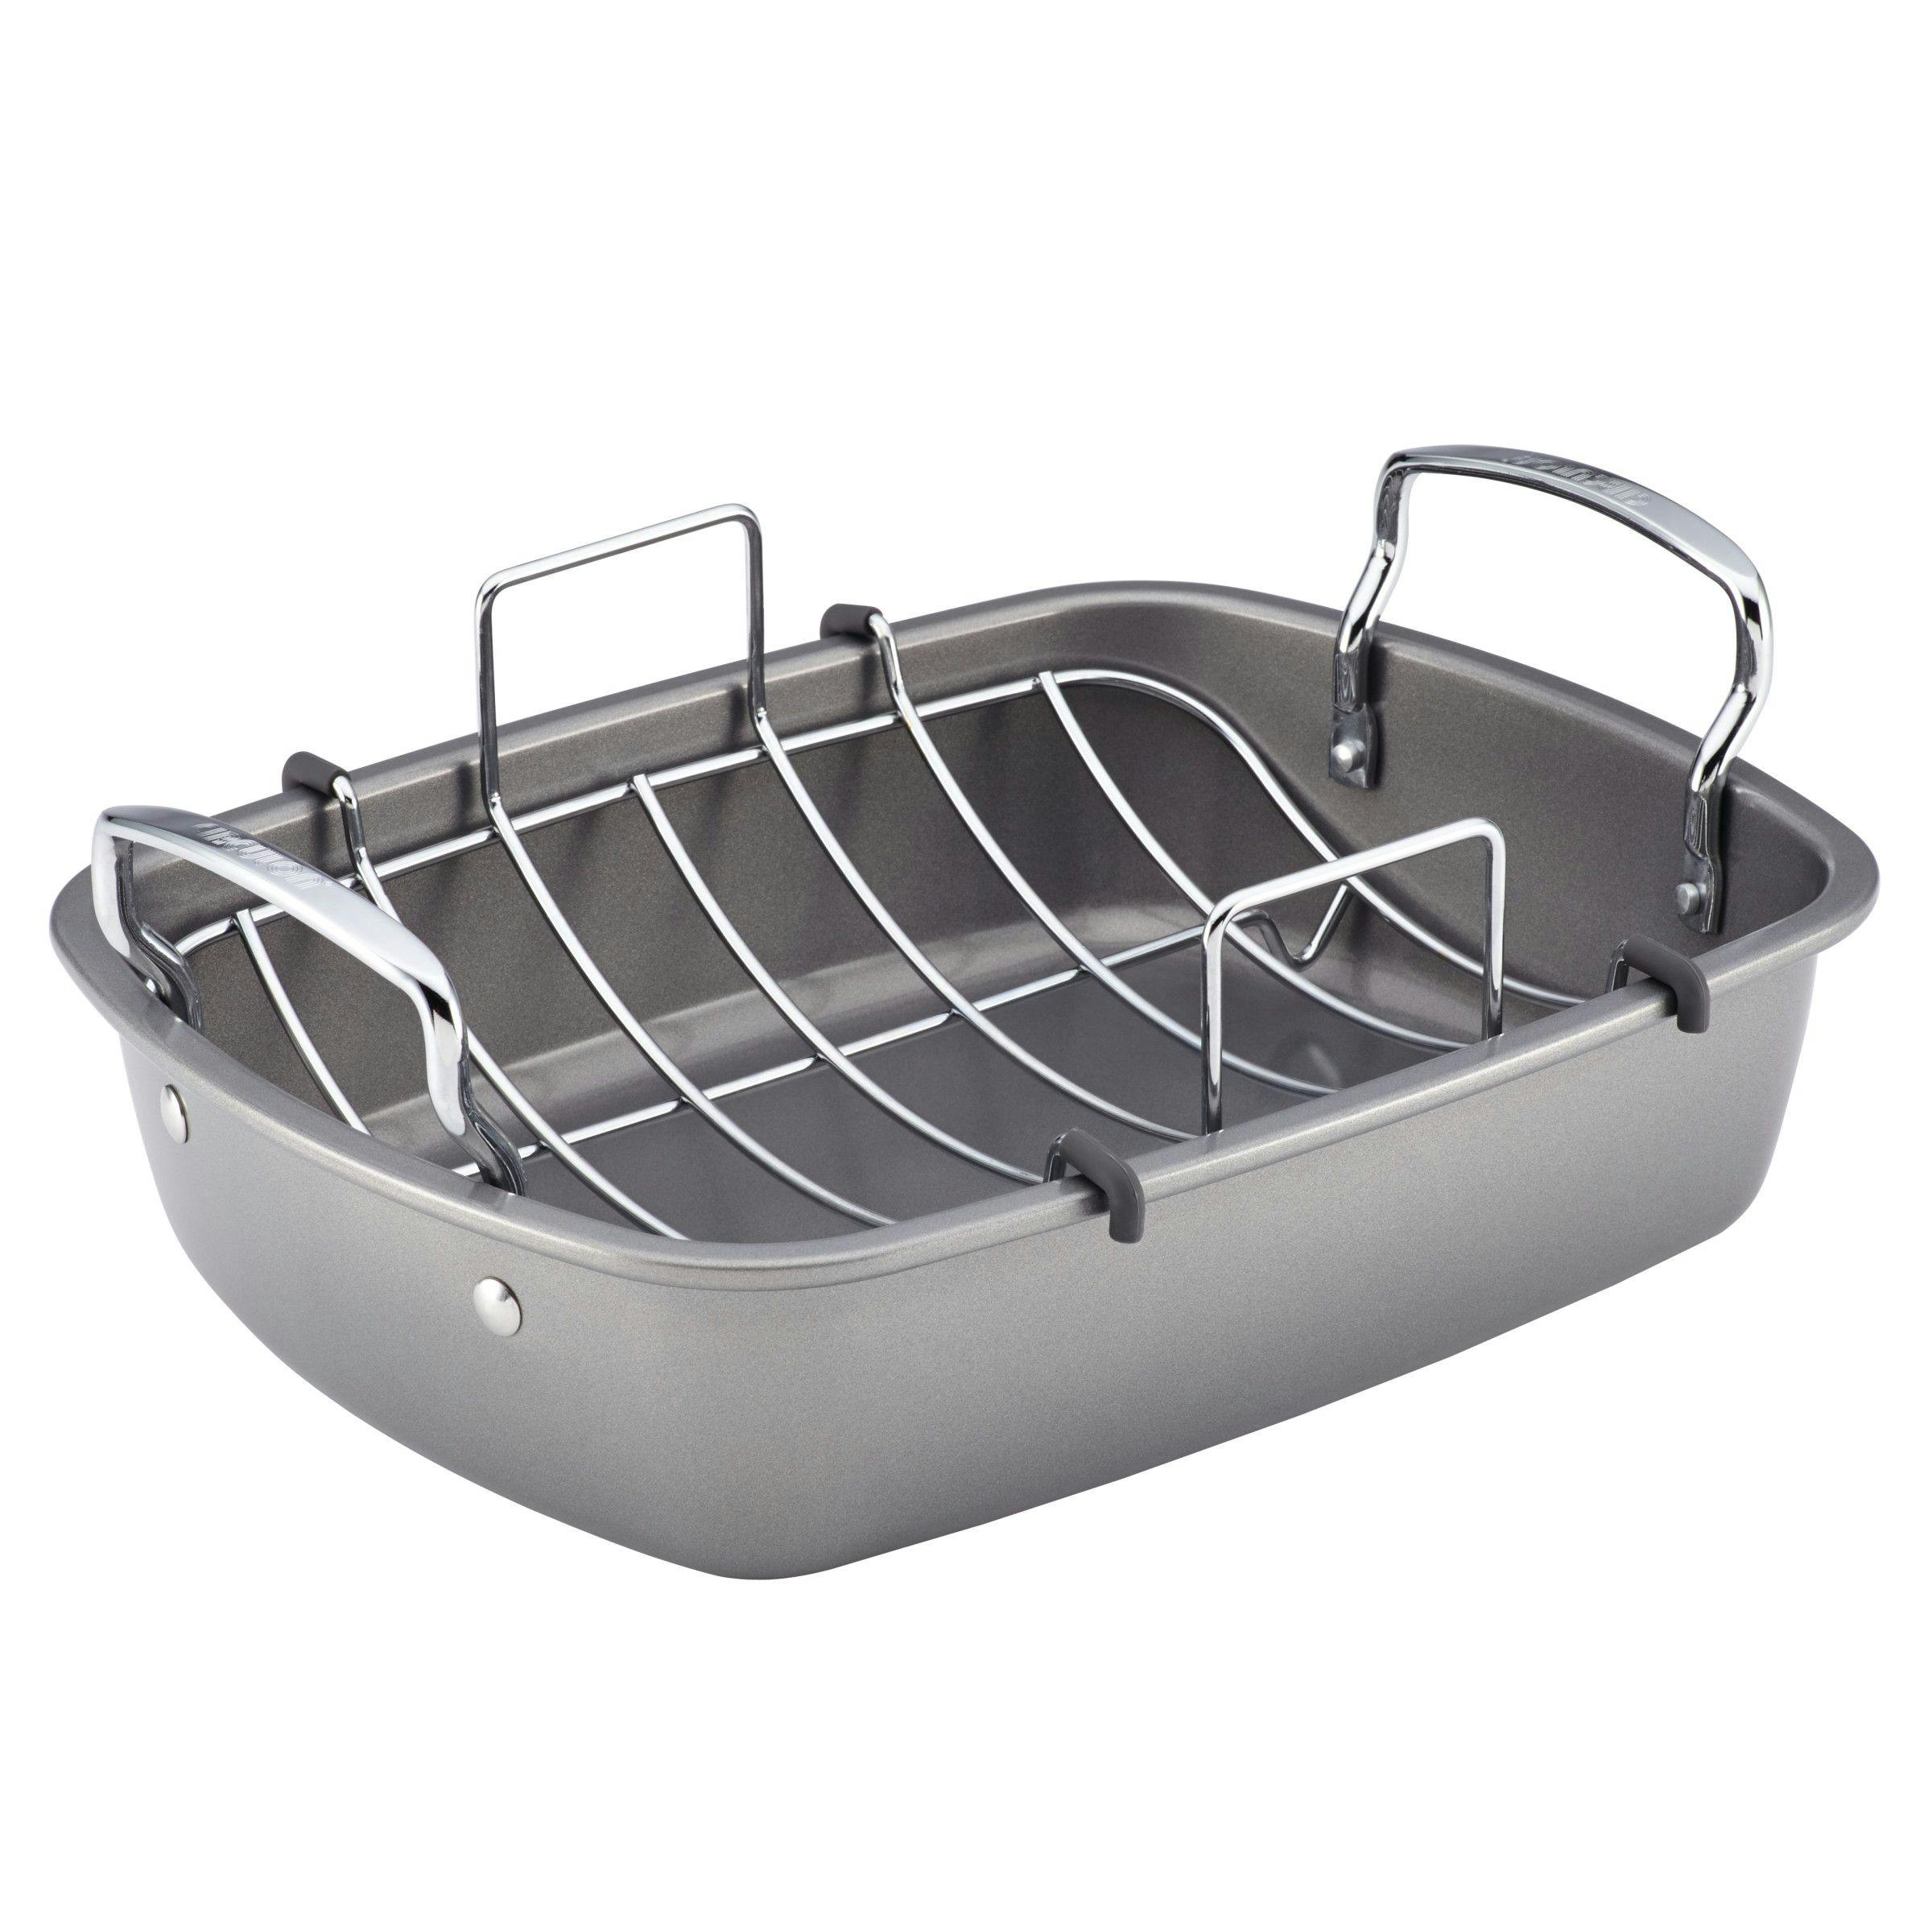 Circulon Total Bakeware Nonstick Roaster with Rack, 17-Inch x 13-Inch, Gray